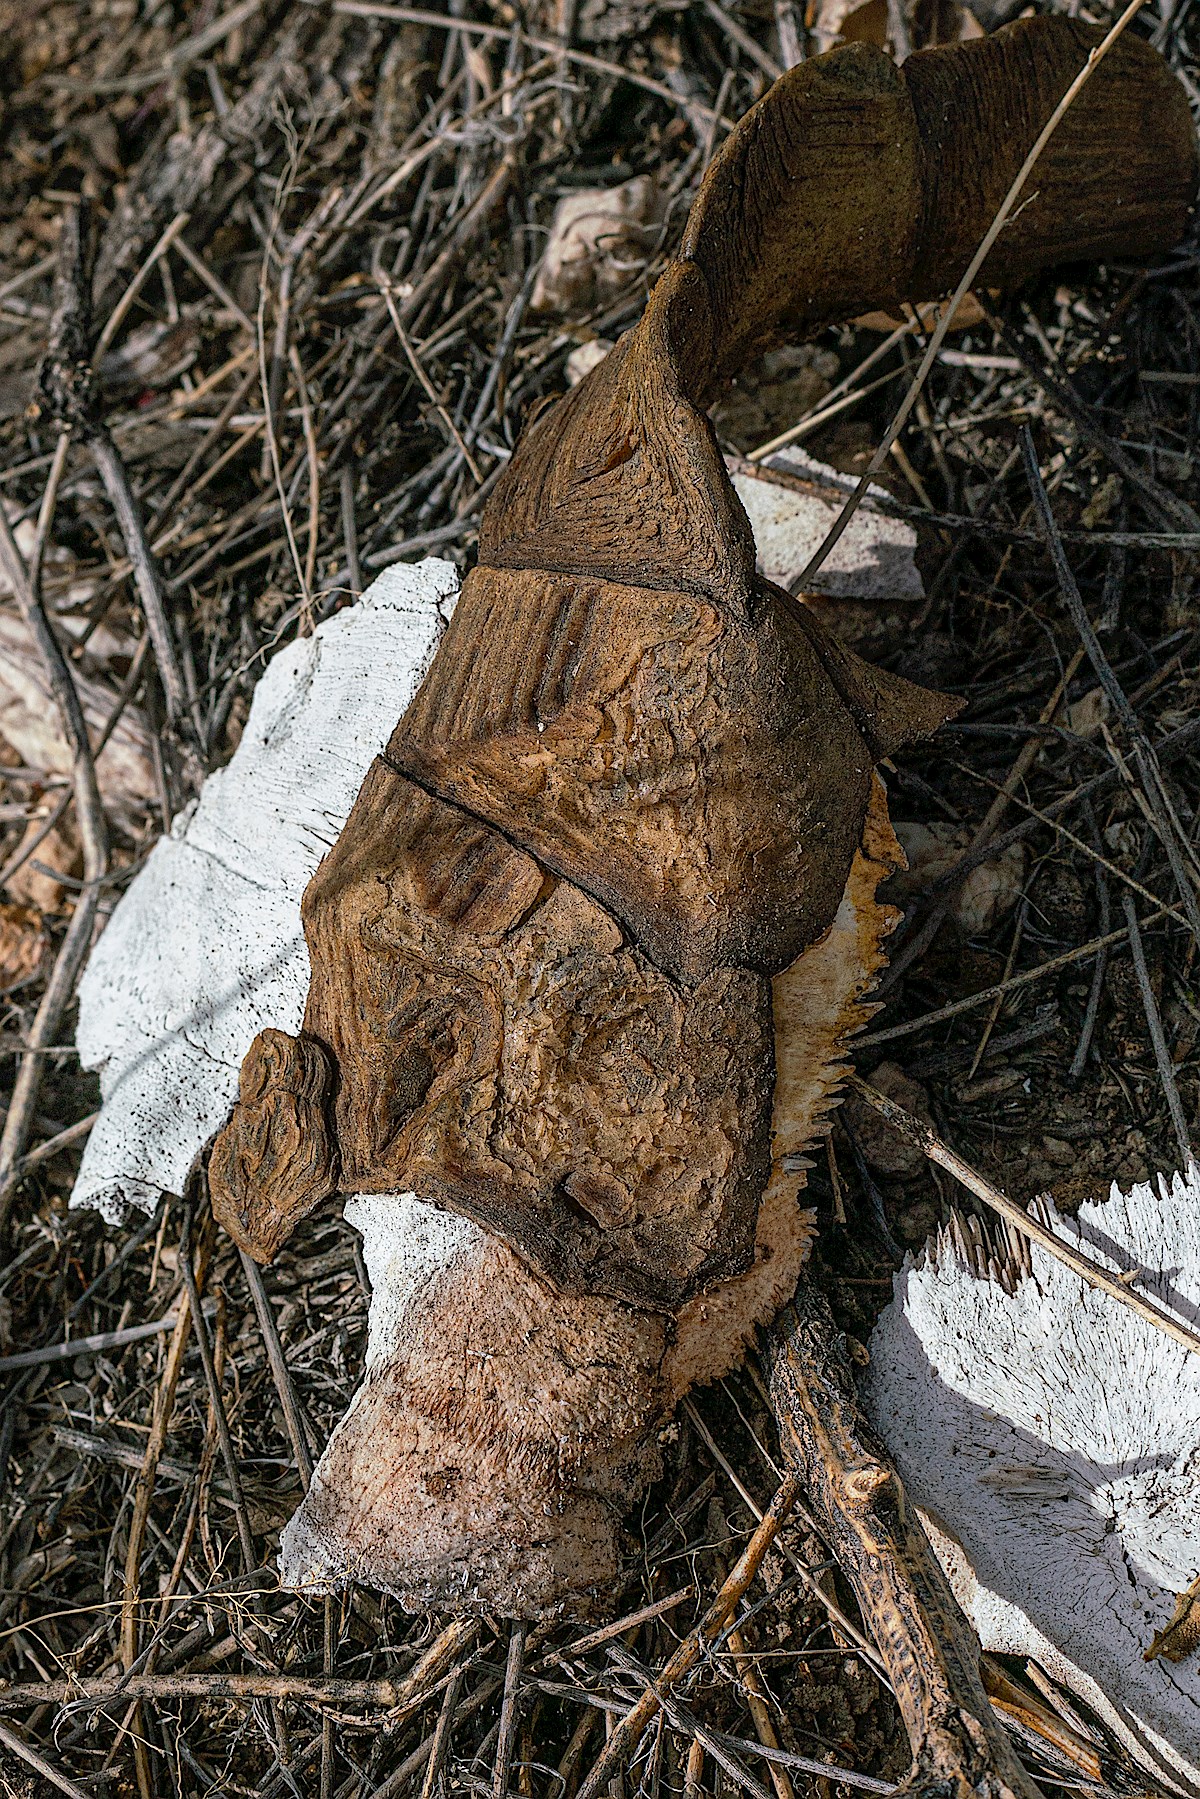 Tortoise remains. May 2019.